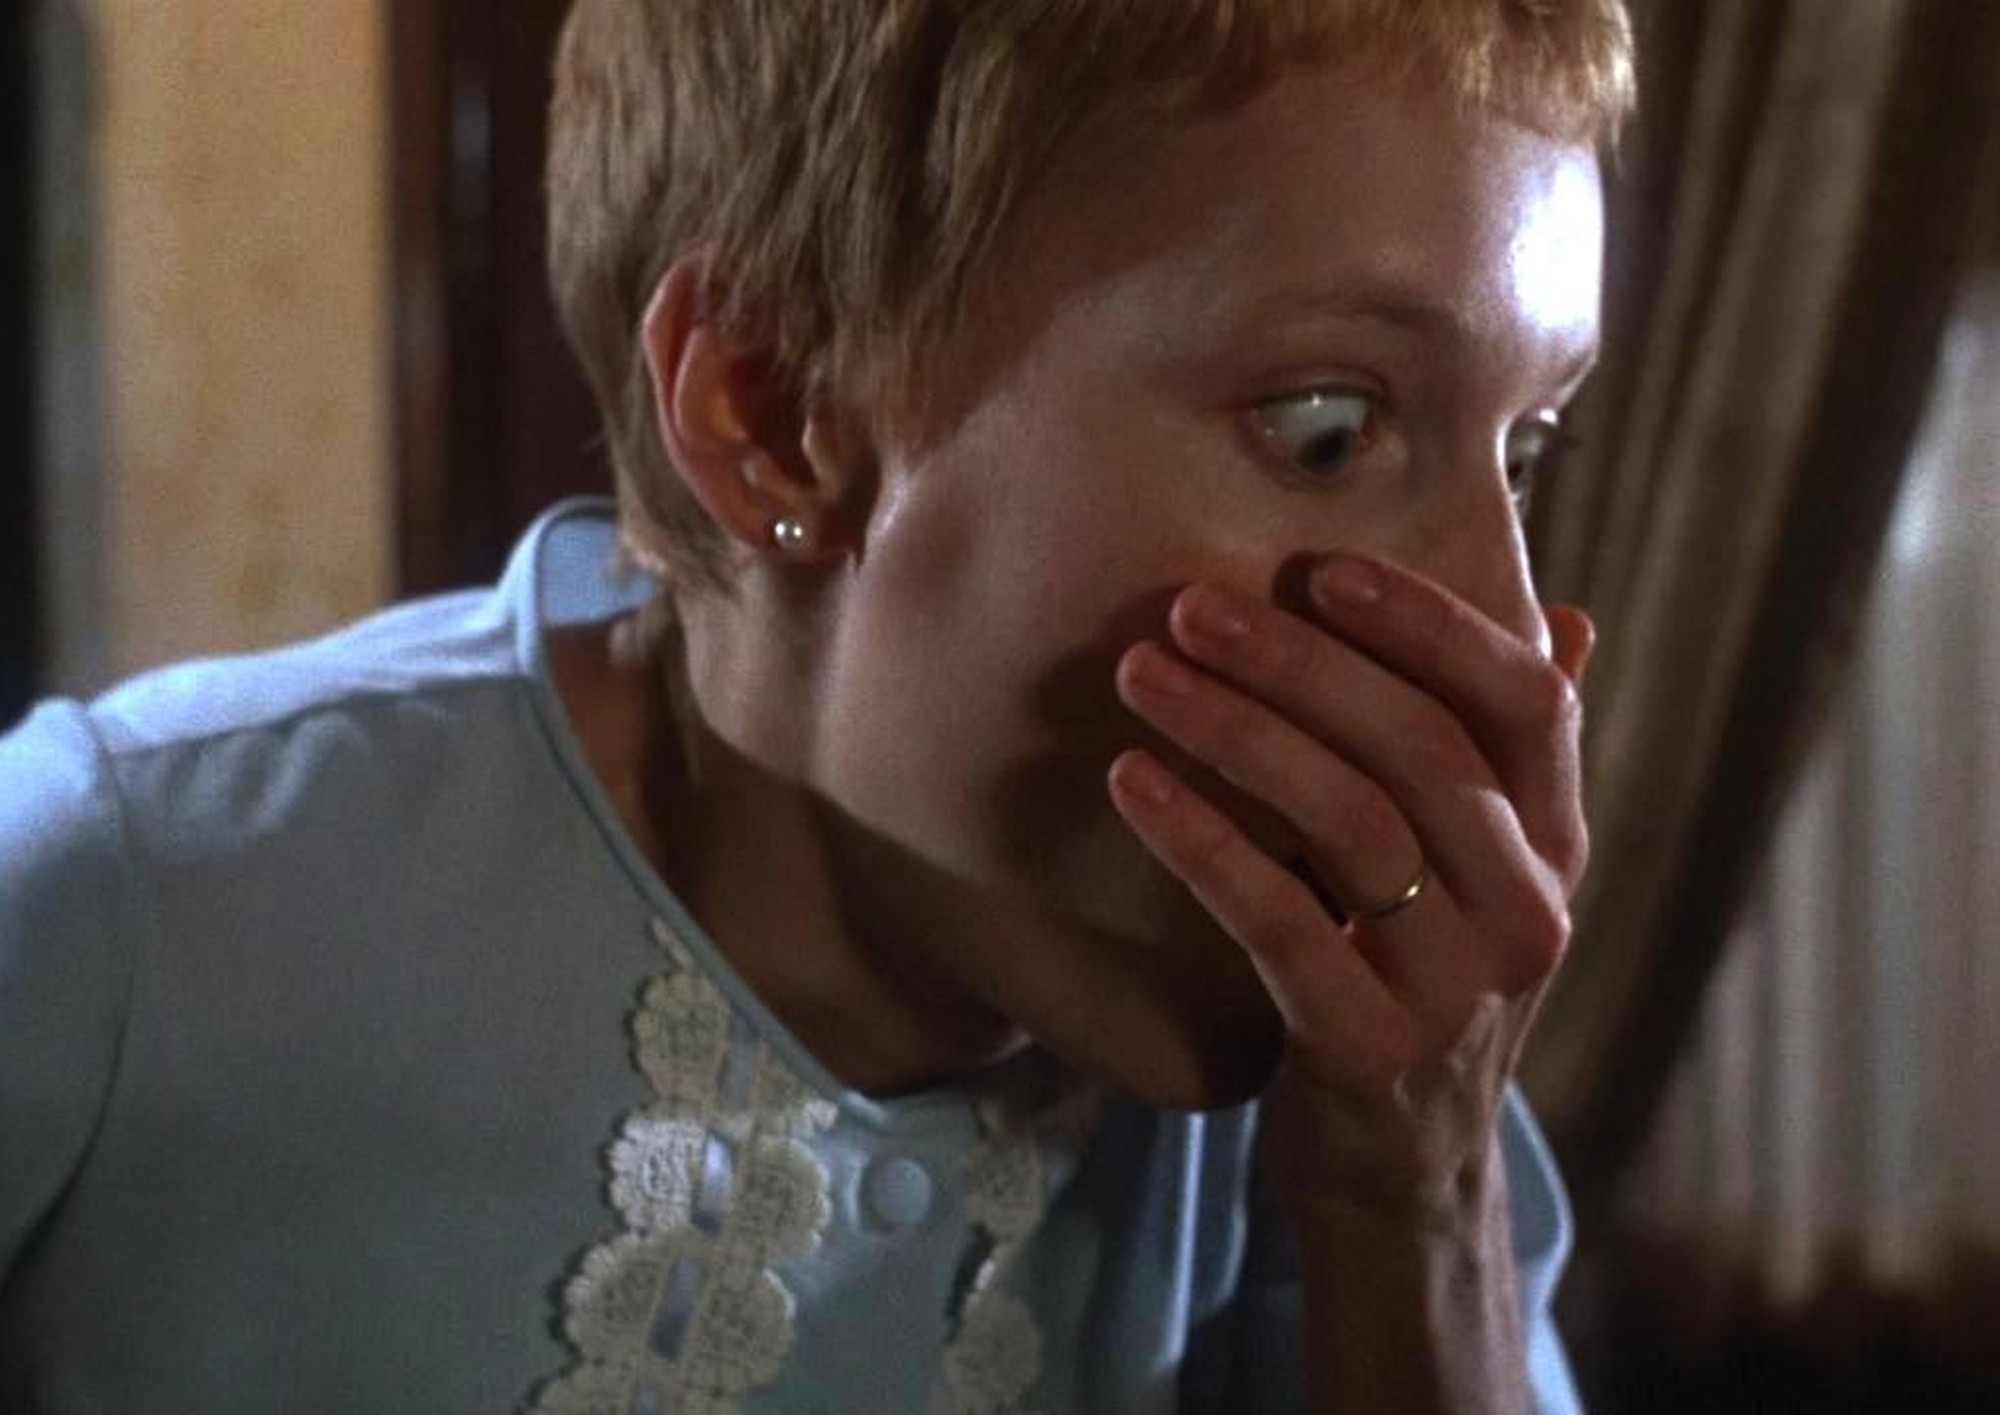 Image from the motion picture Rosemary's Baby